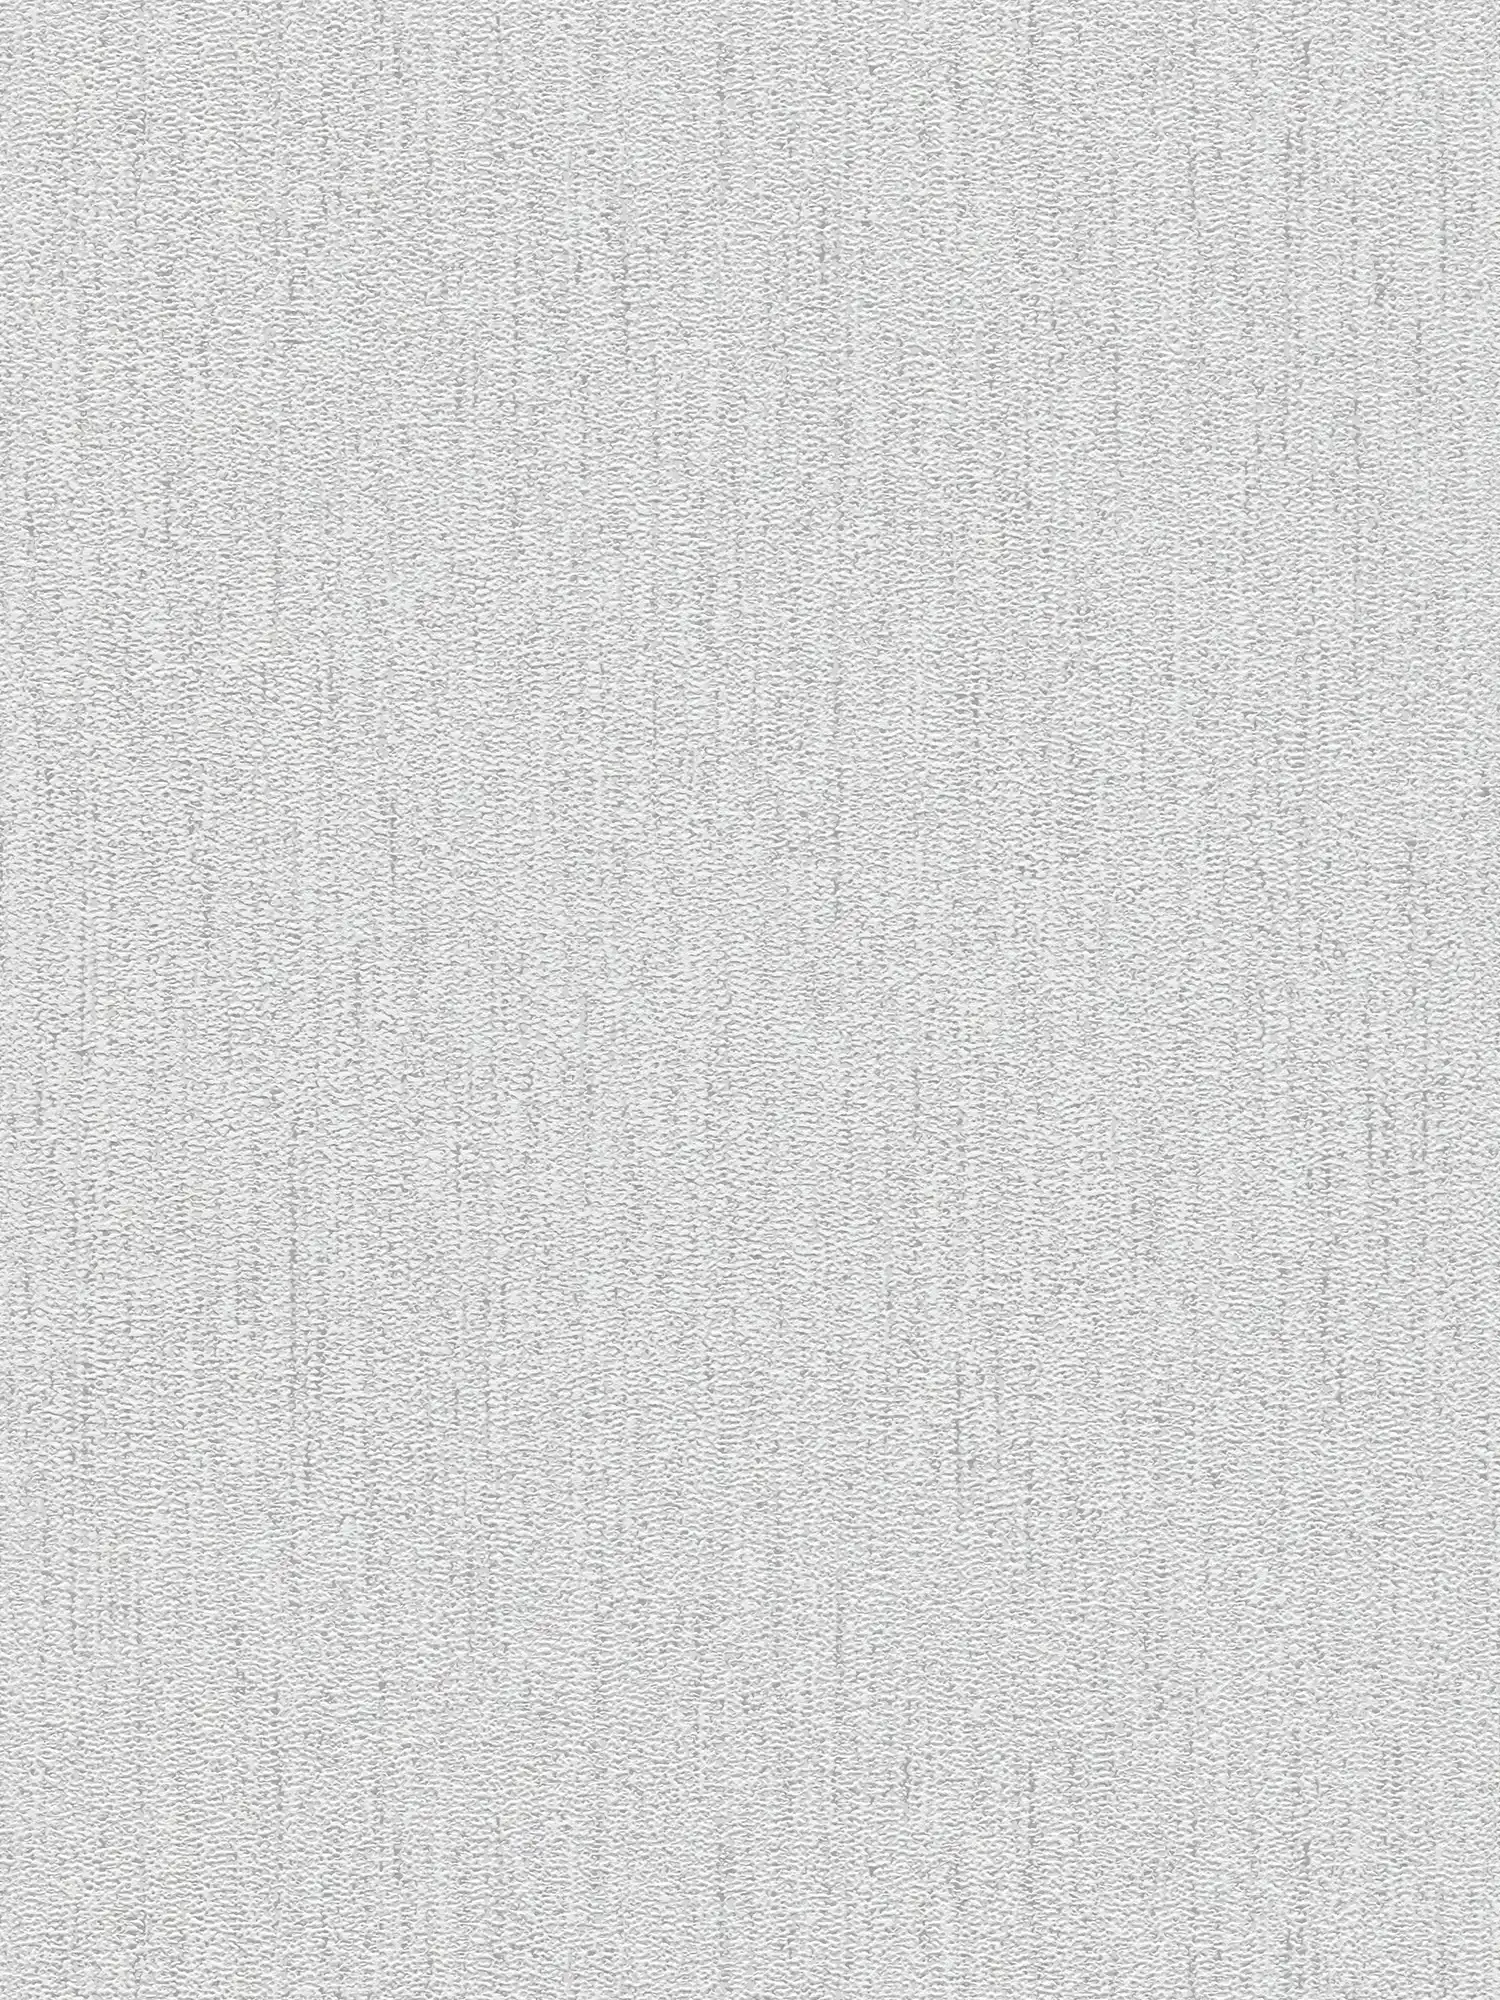 Textured wallpaper with fabric pattern - light grey, silver
